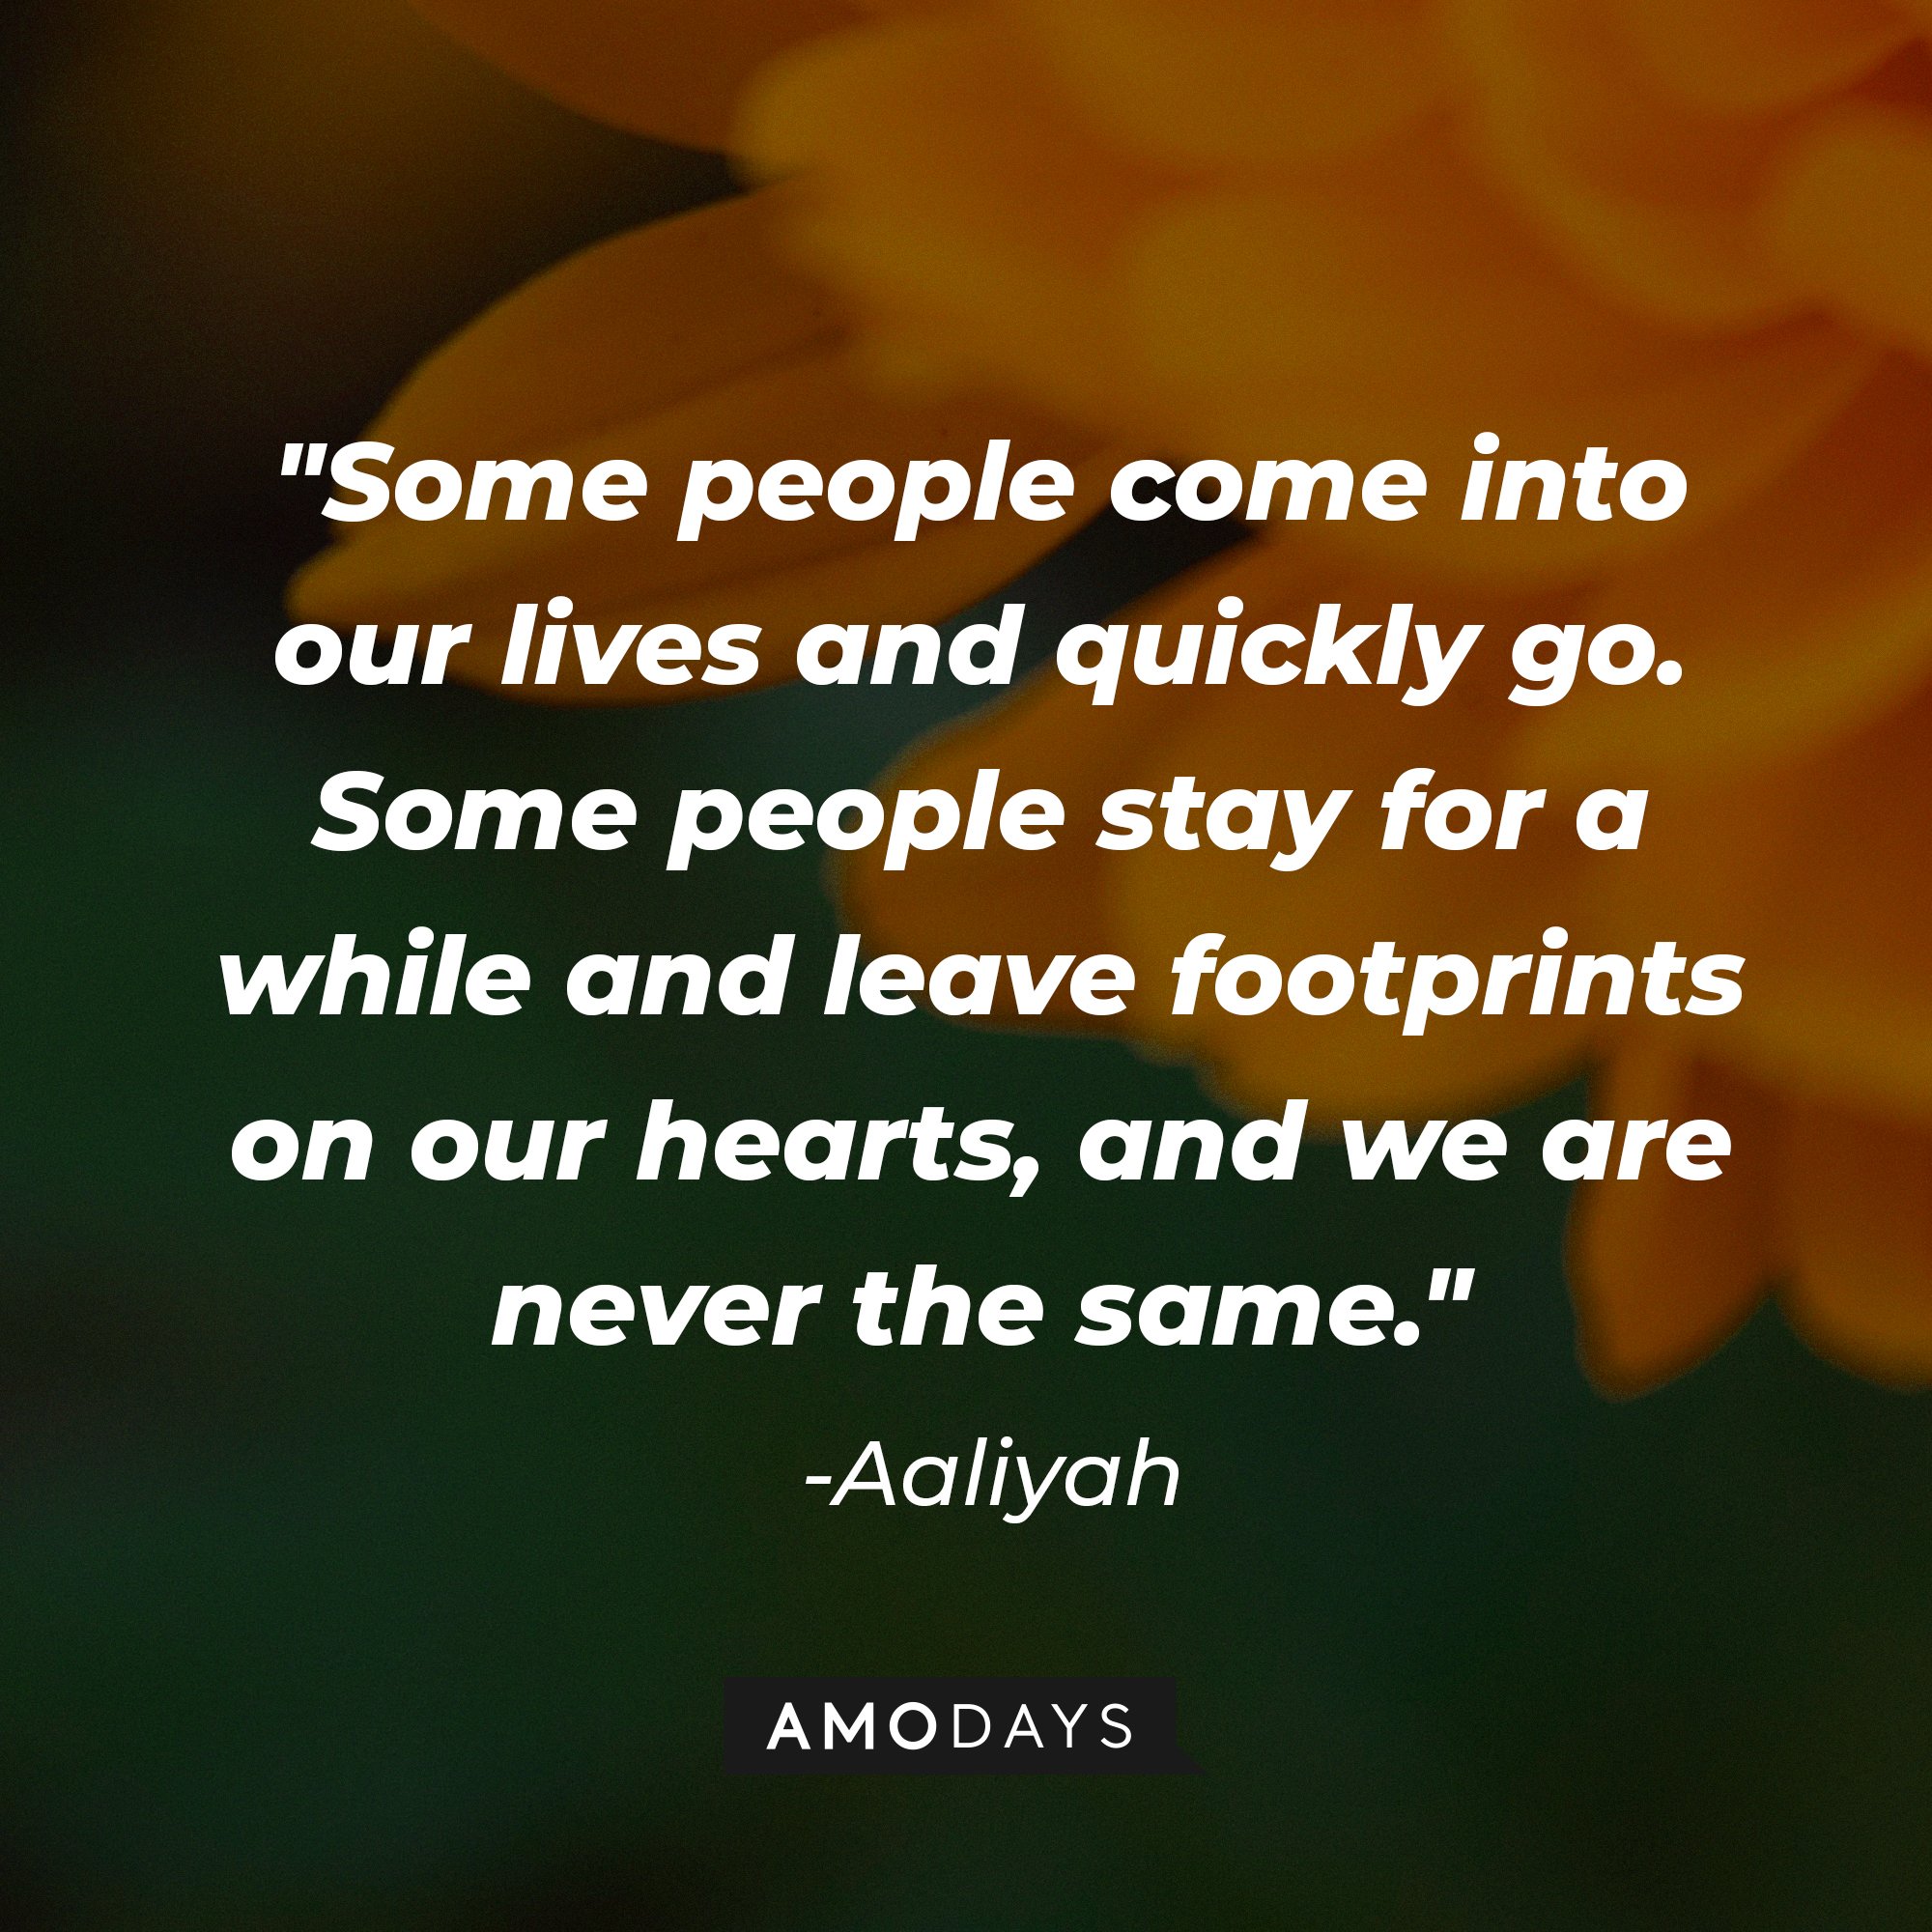 Aaliyah’s quote: "Some people come into our lives and quickly go. Some people stay for a while and leave footprints on our hearts, and we are never the same."  | Image: AmoDays